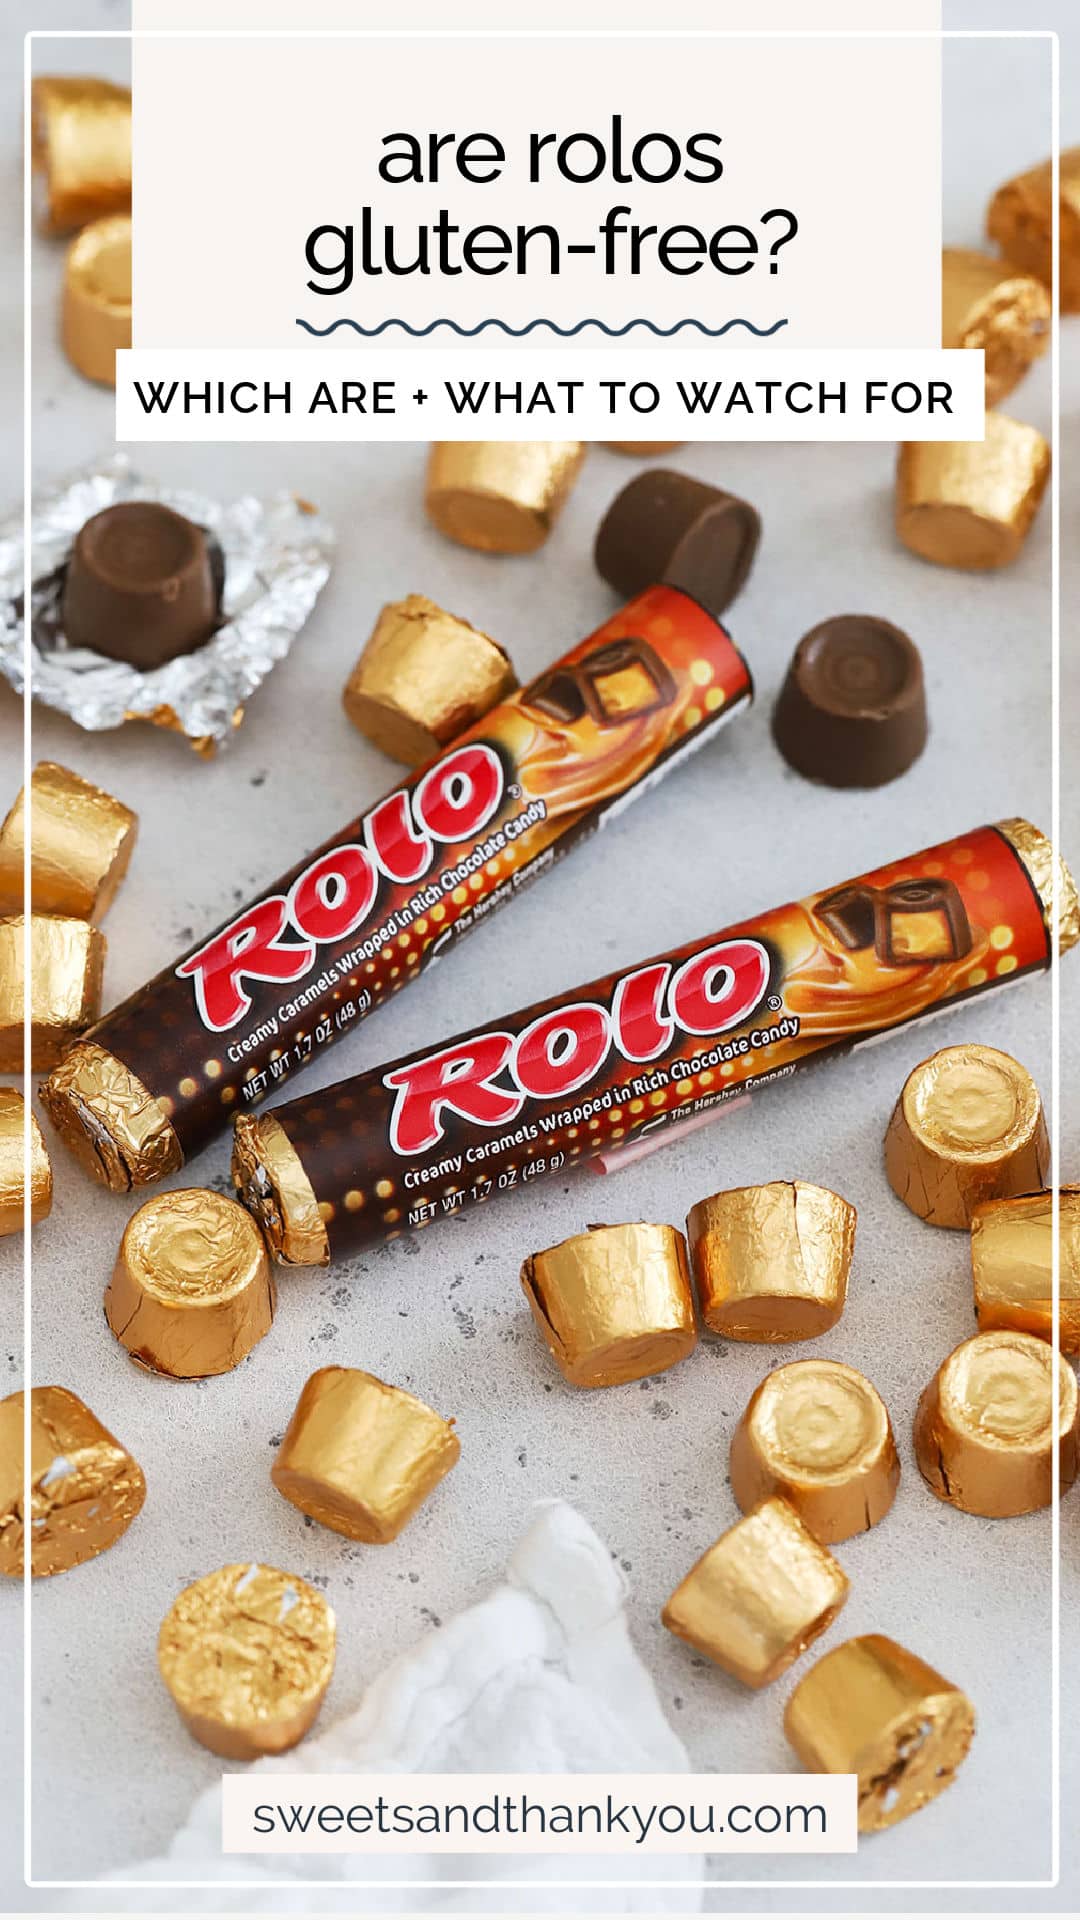 Wondering if Rolos are gluten-free? Get the scoop on which varieties are safe to eat, what to watch out for, and more! / are rolo gluten-free / is rolo gluten-free / are rolo candy gluten-free / which candy is gluten-free / gluten-free halloween candy / gluten-free candy to bake with / gluten-free tip